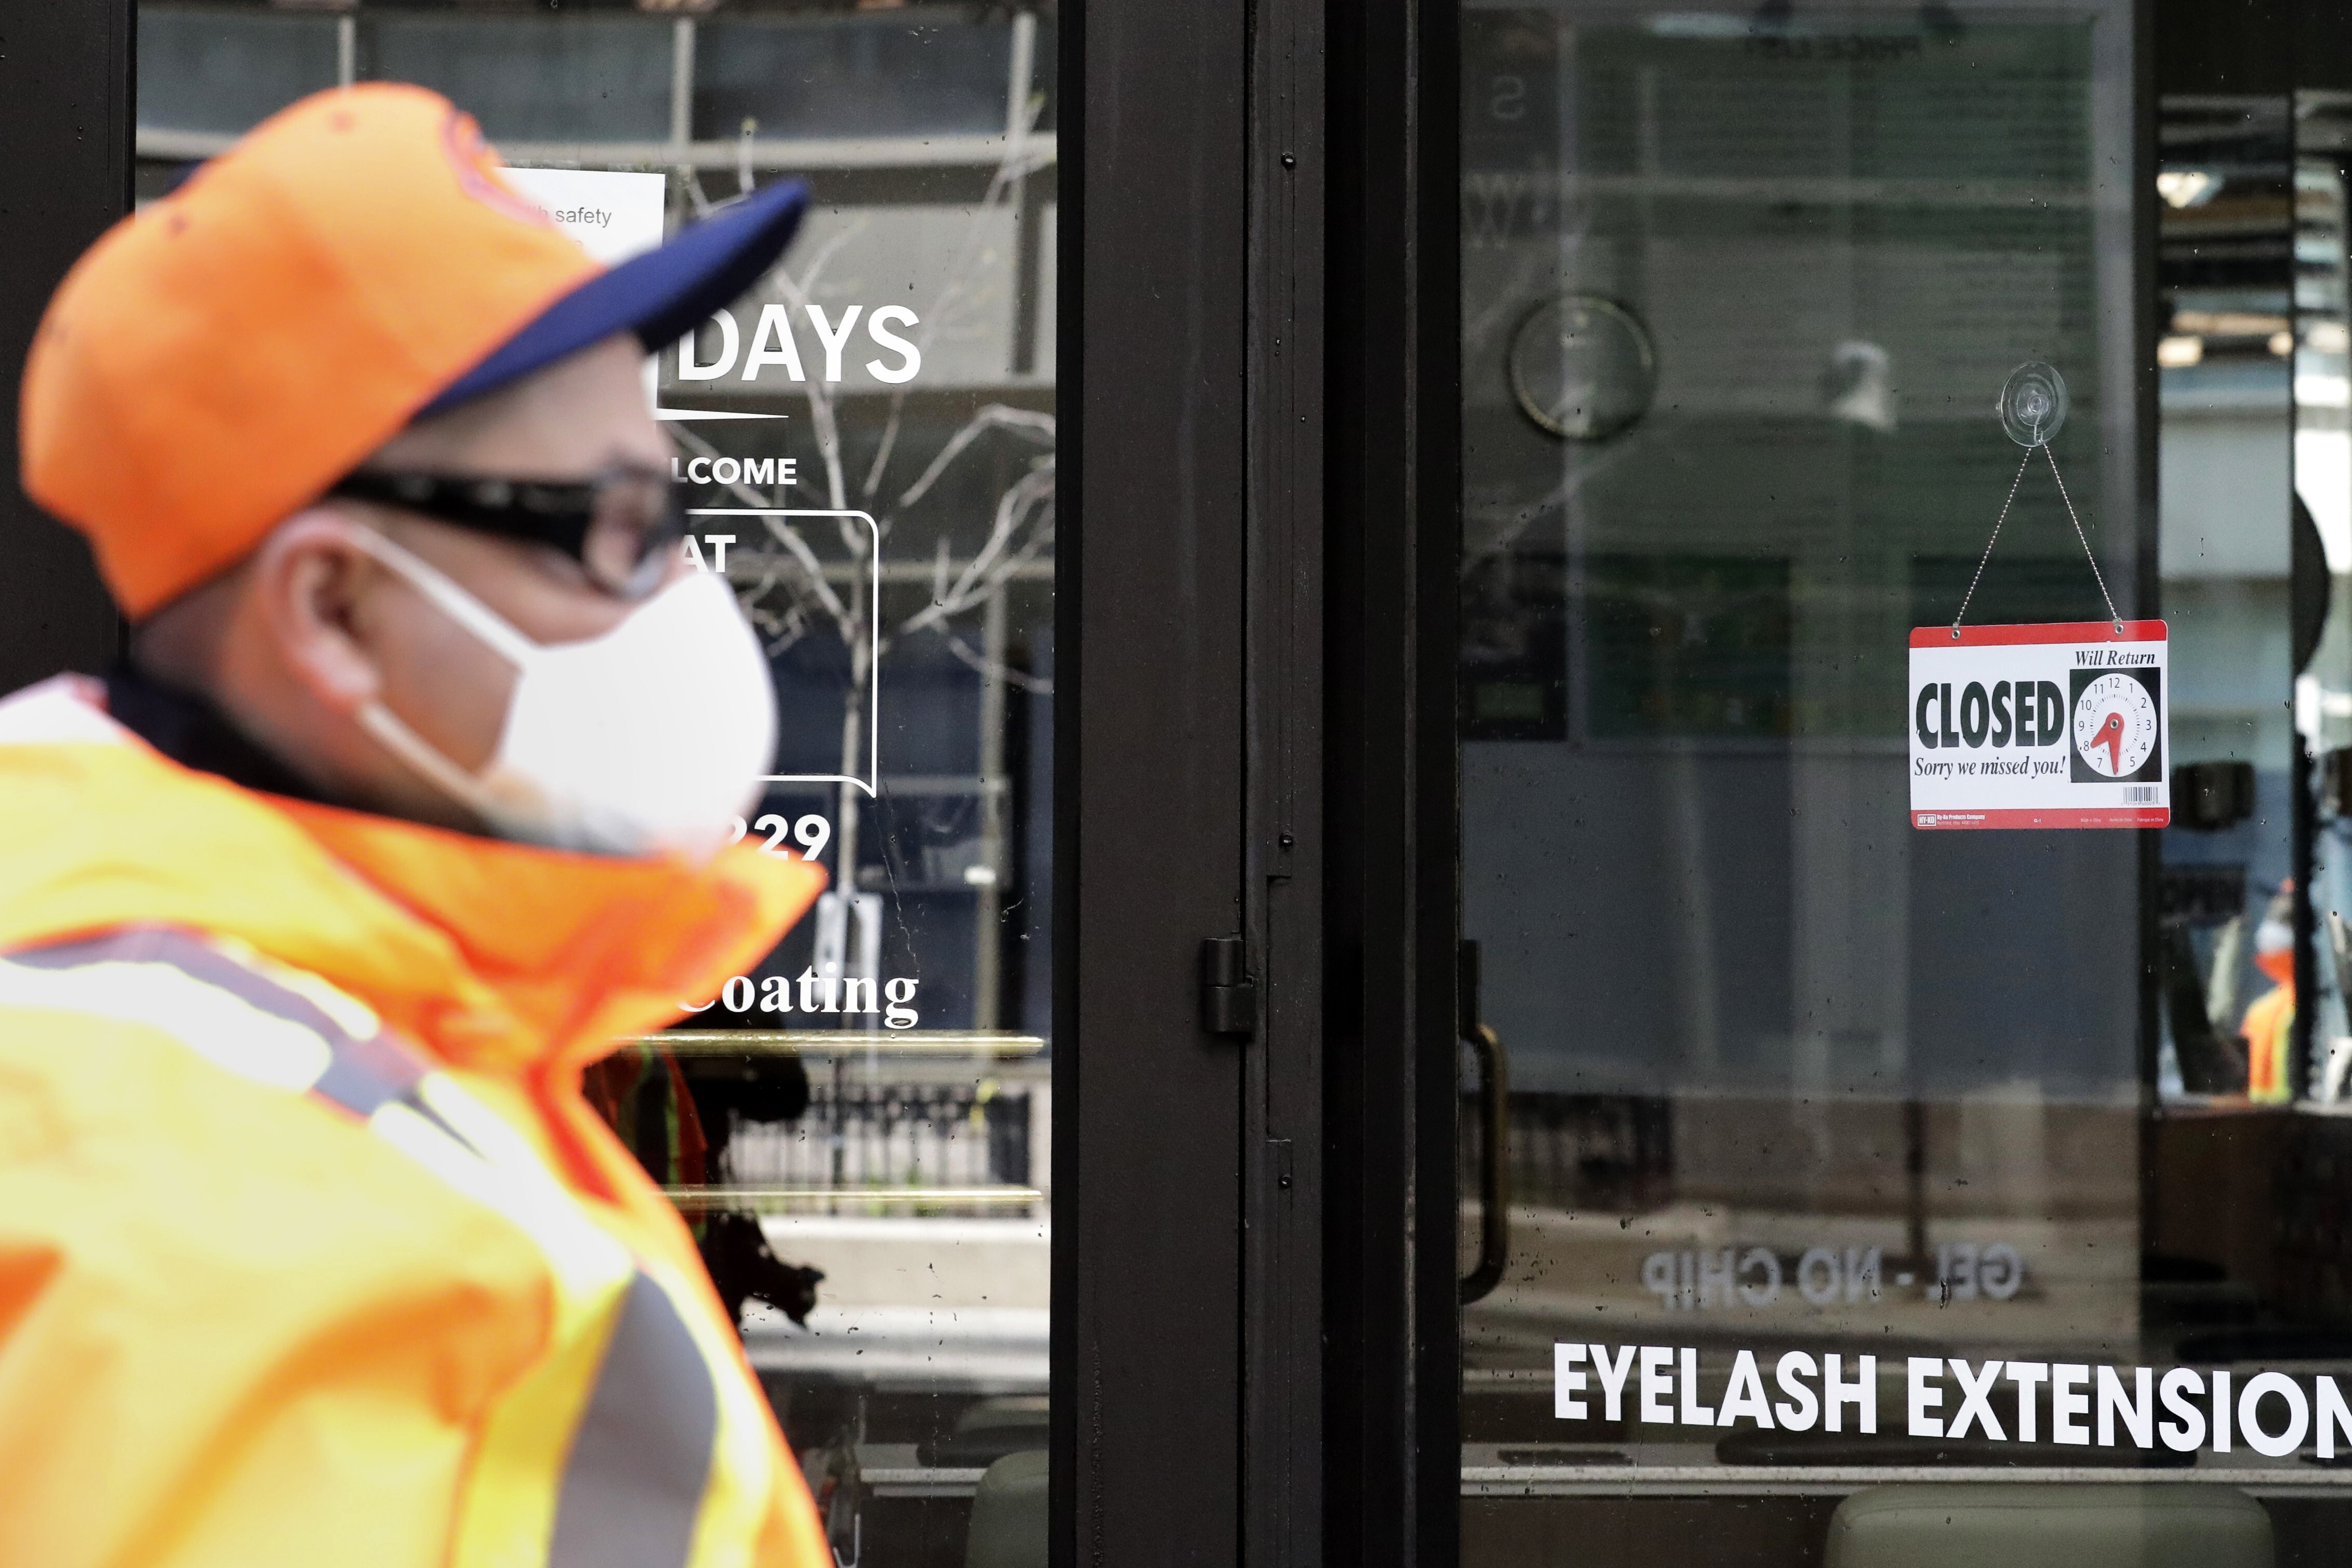 A “closed” sign at a Fashion Nails shop in downtown Chicago. Photo: AP Photo